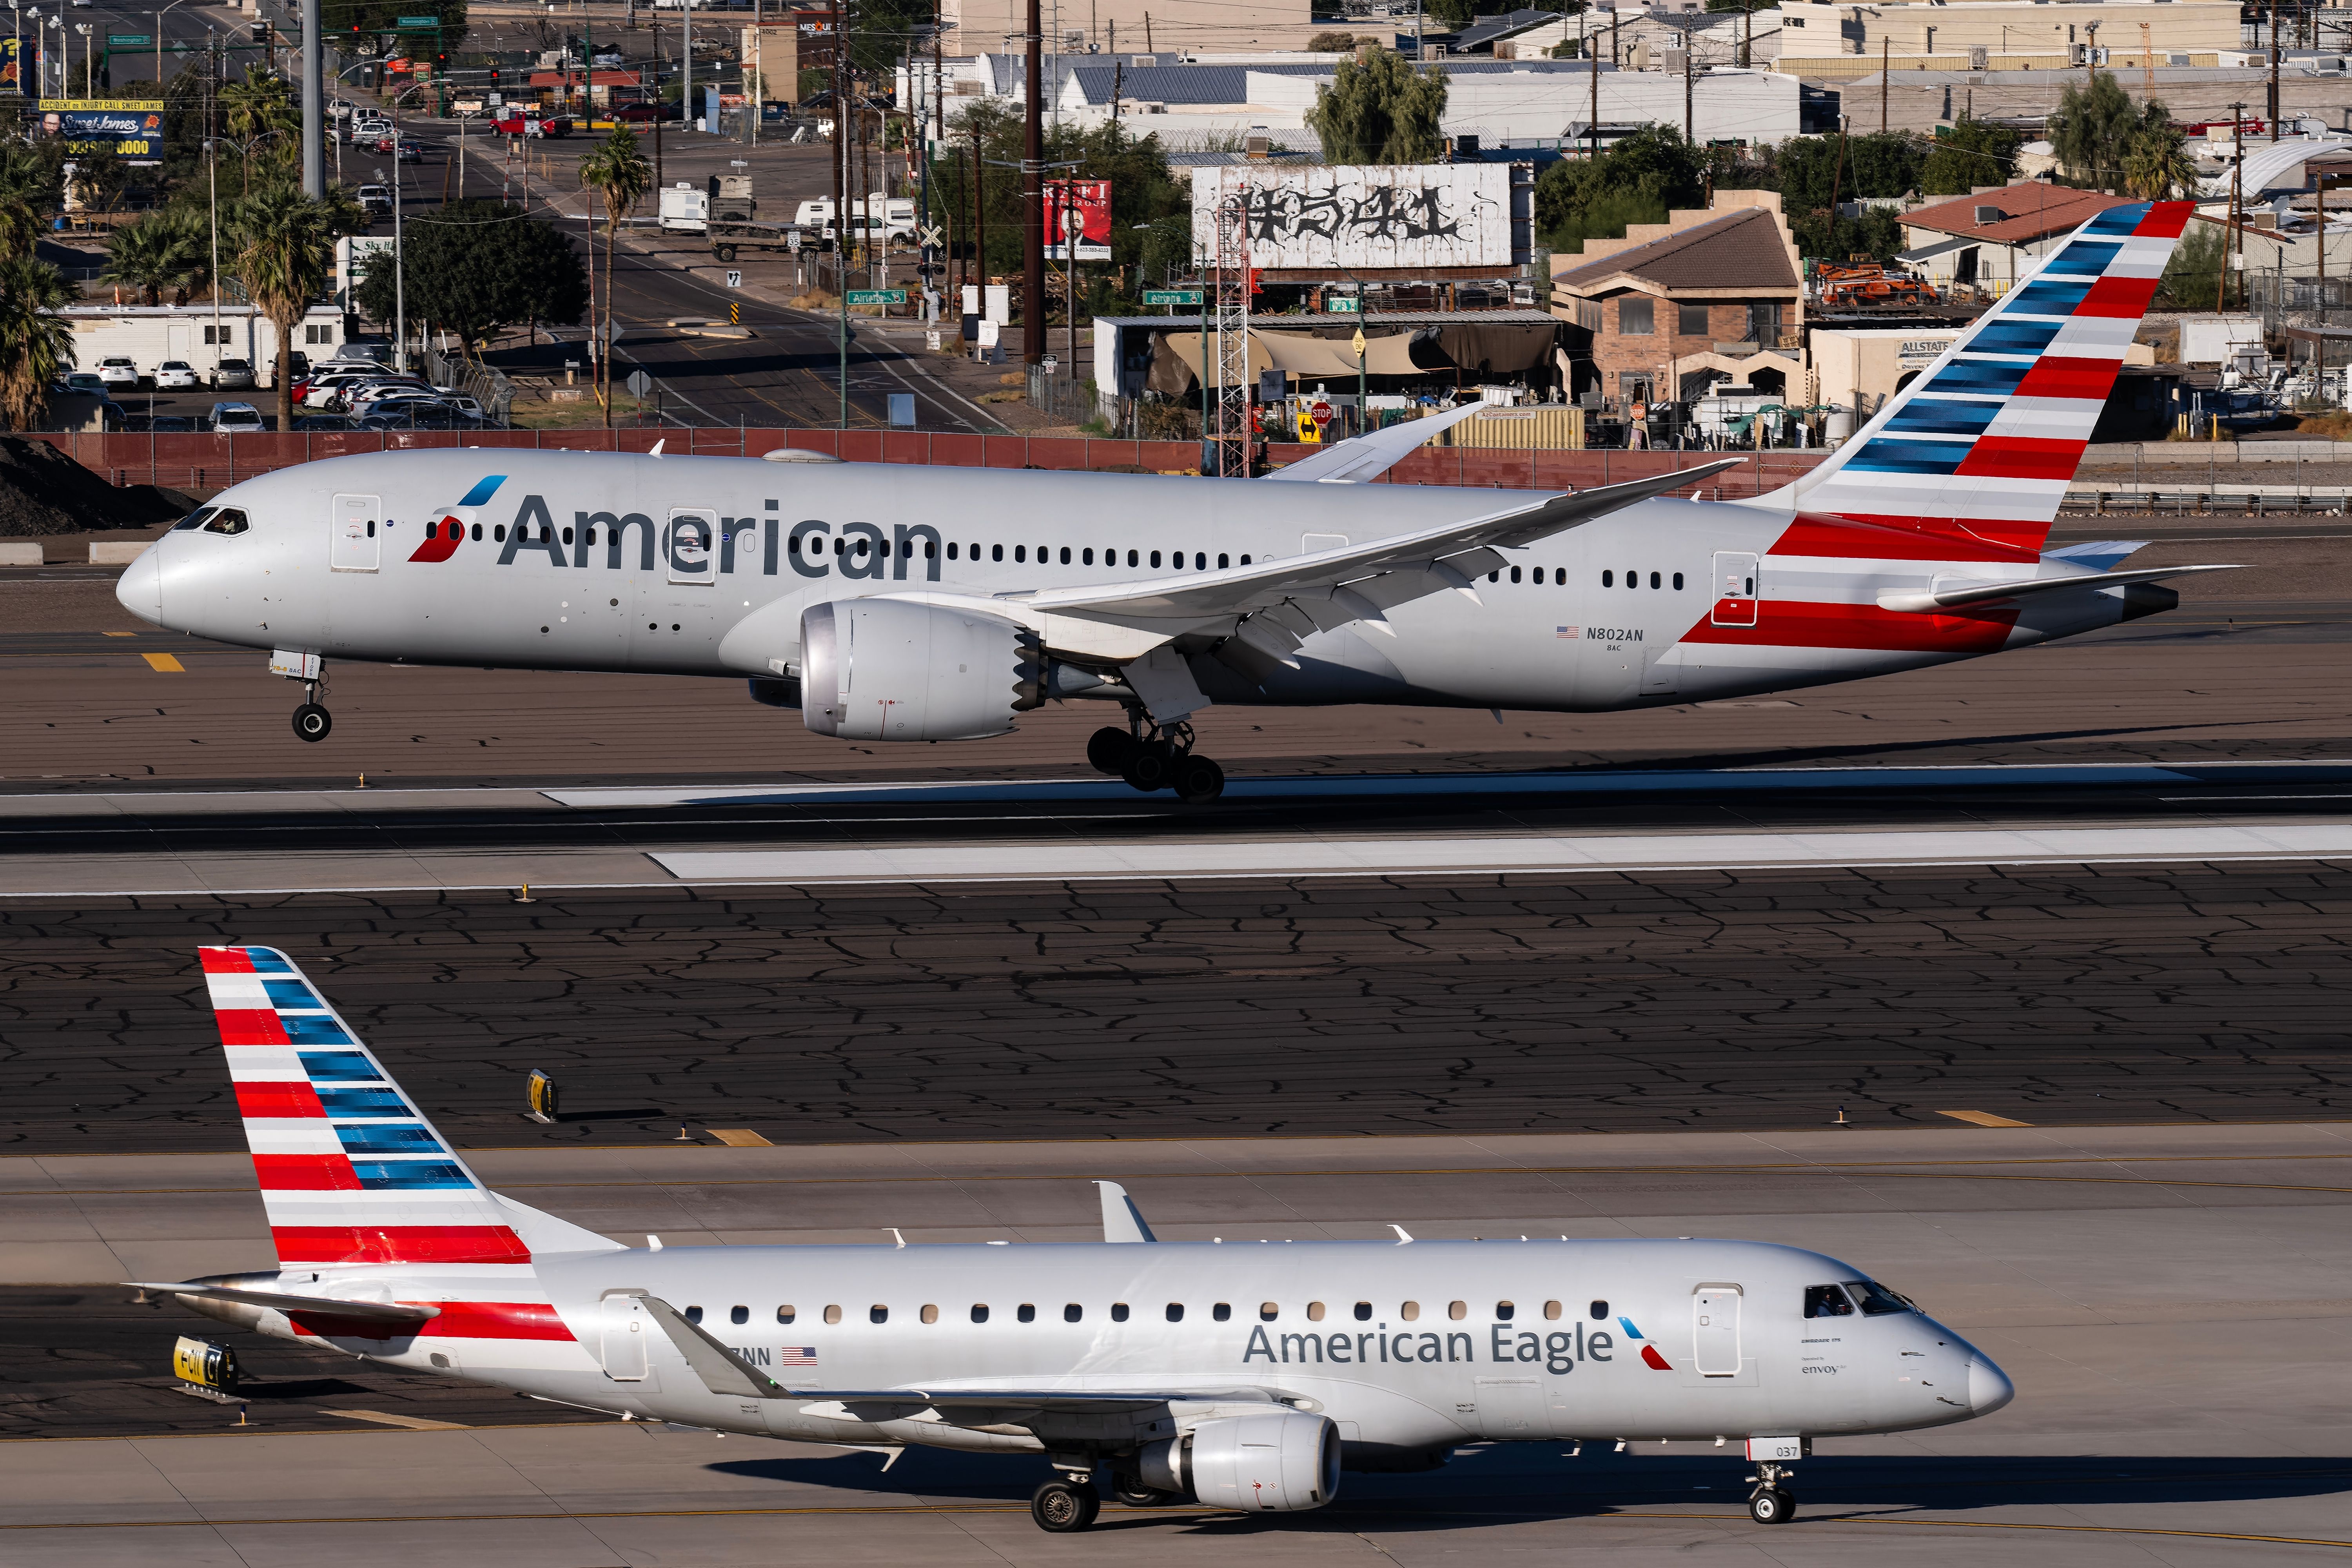 Two American Airlines aircraft on the apron at Phoenix Sky Harbor Airport.